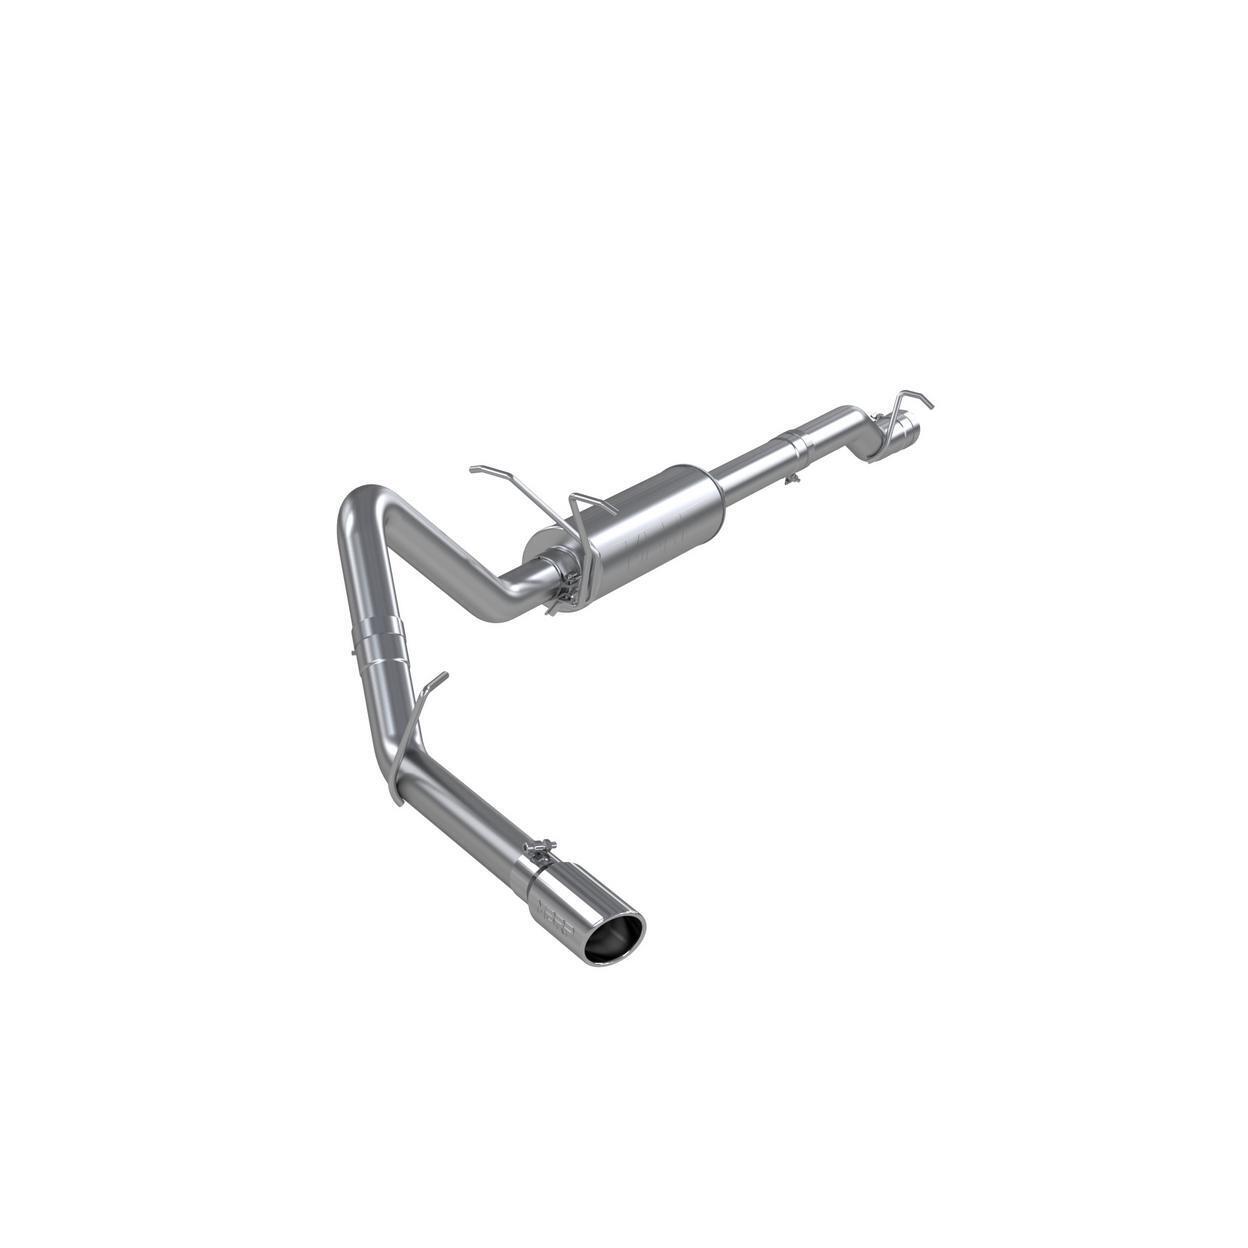 MBRP Exhaust S5216AL-KZ Exhaust System Kit for 2009-2010 Ford F-350 Super Duty